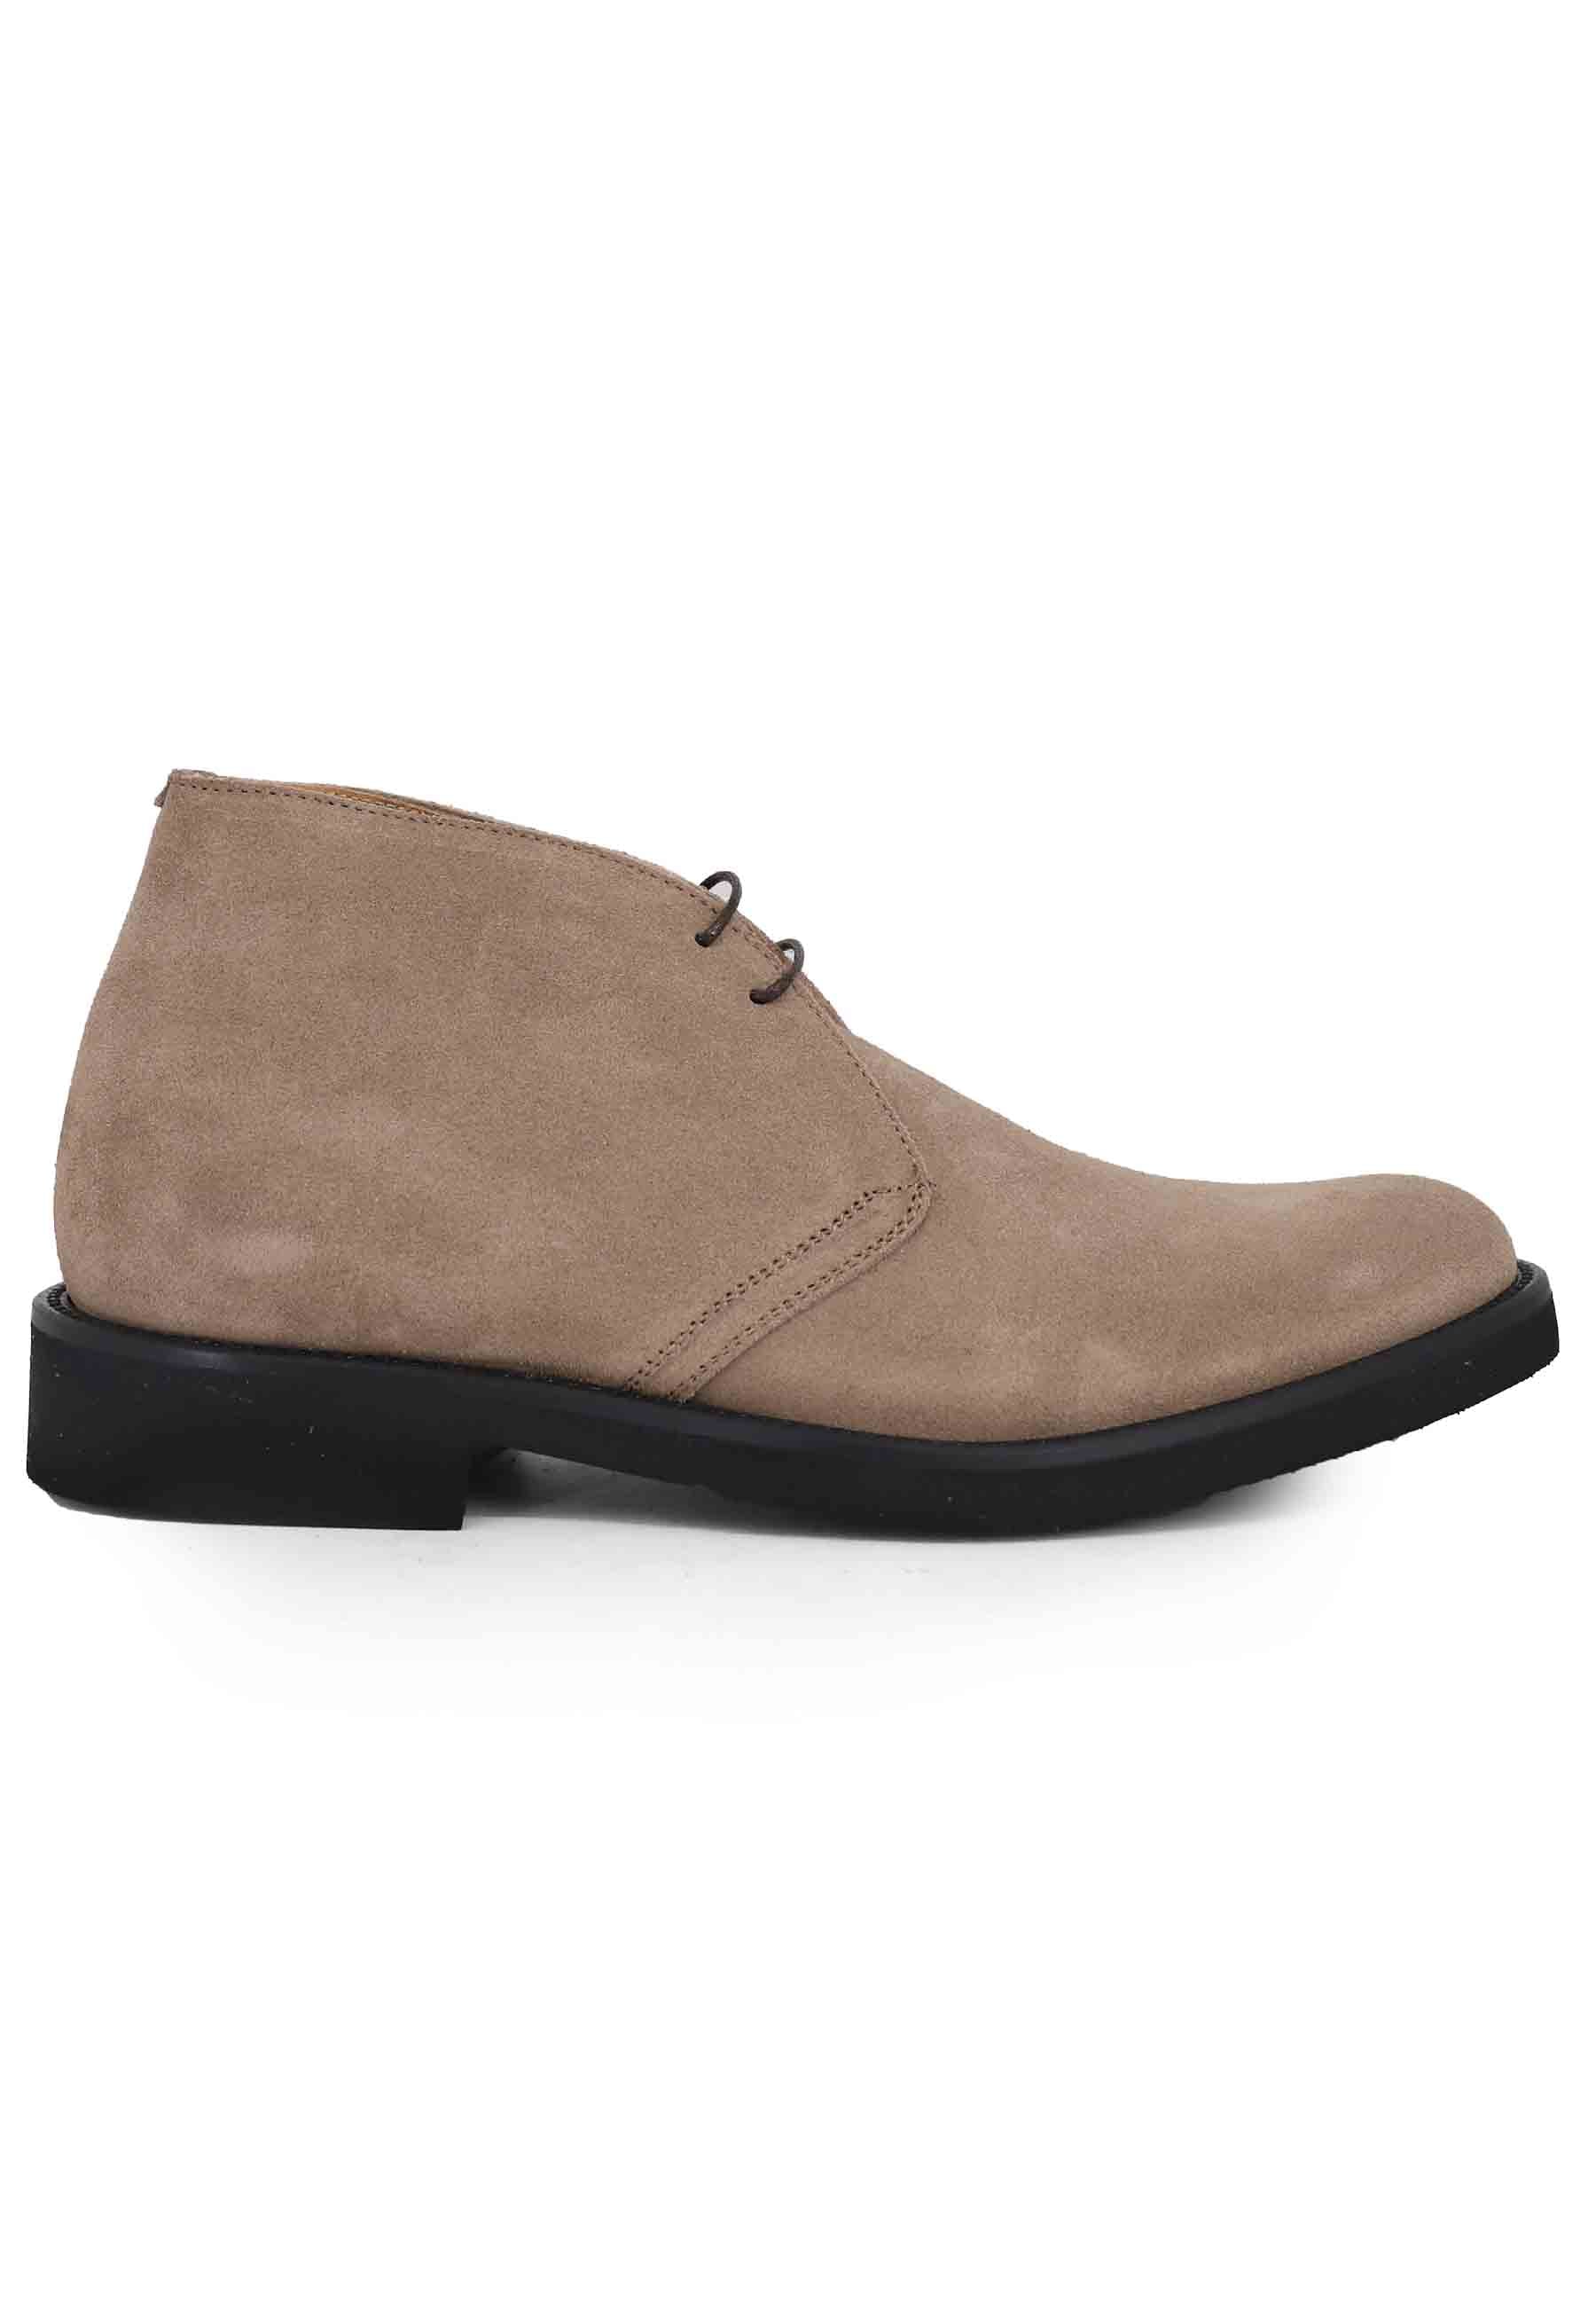 Men's beige suede ankle boots with ultra-light rubber sole